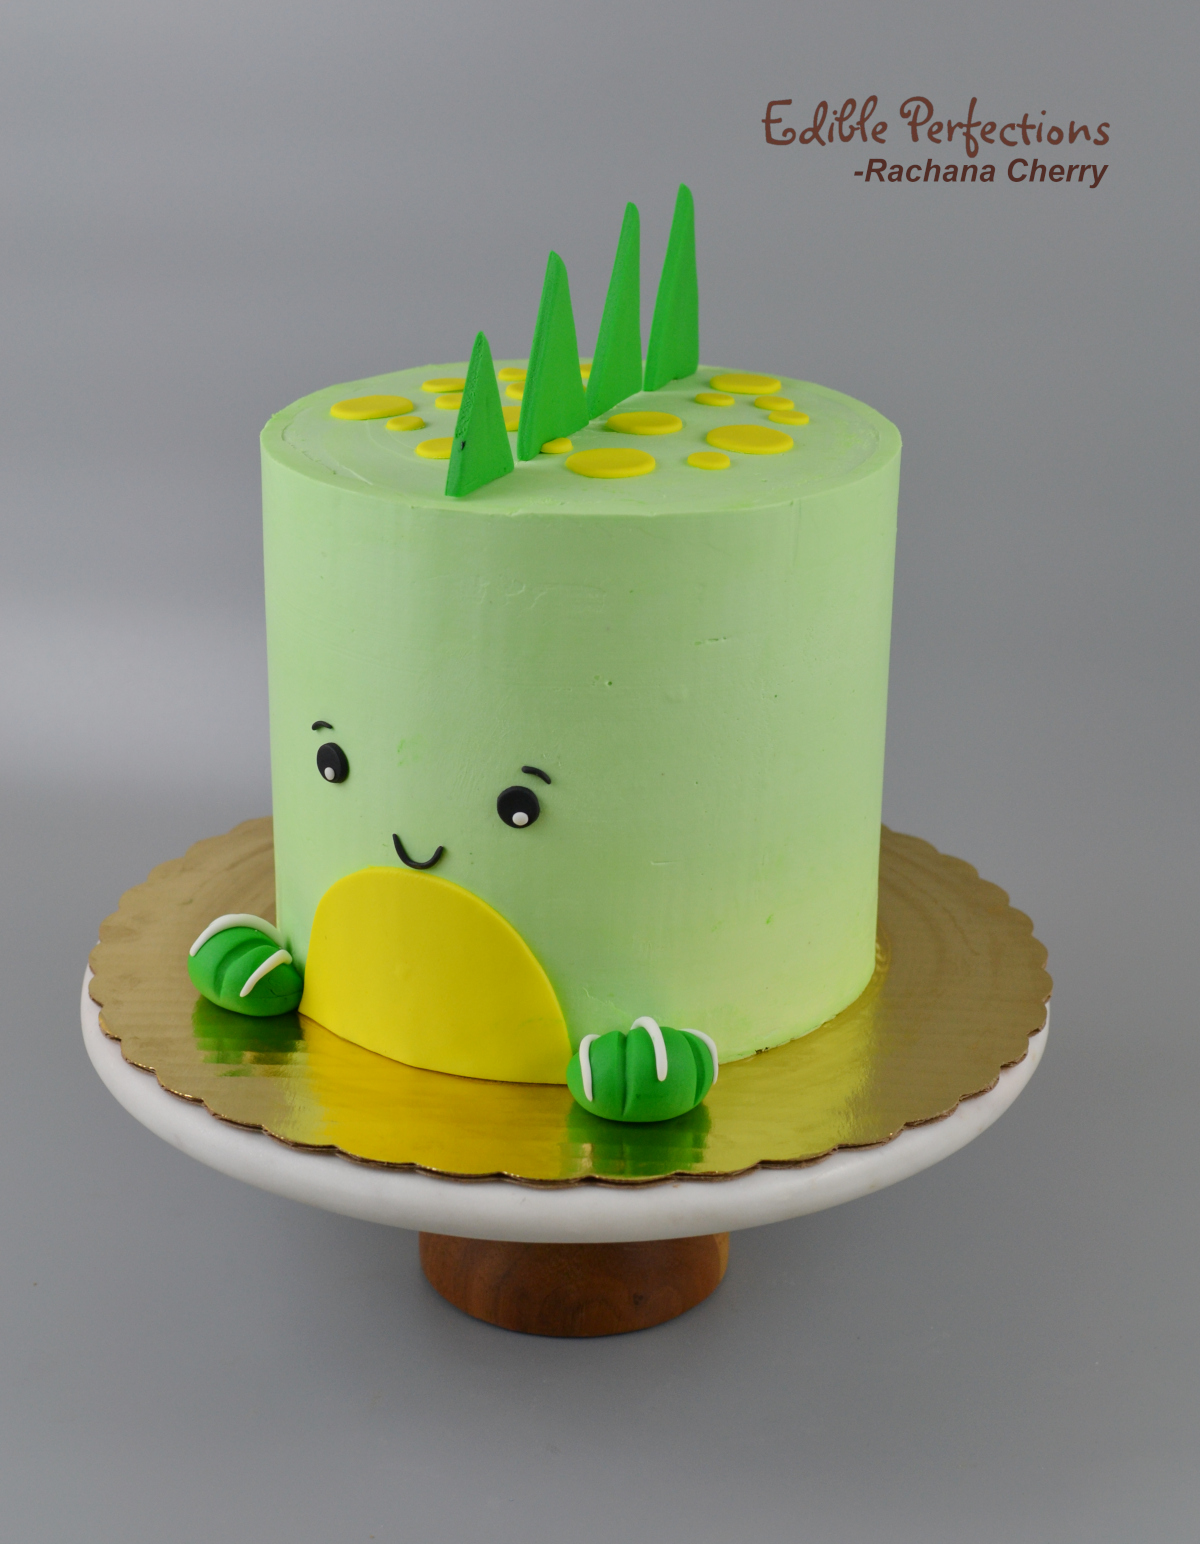 15 Cute Easter Bunny Cake Ideas For Your Easter Sunday - Find Your Cake  Inspiration